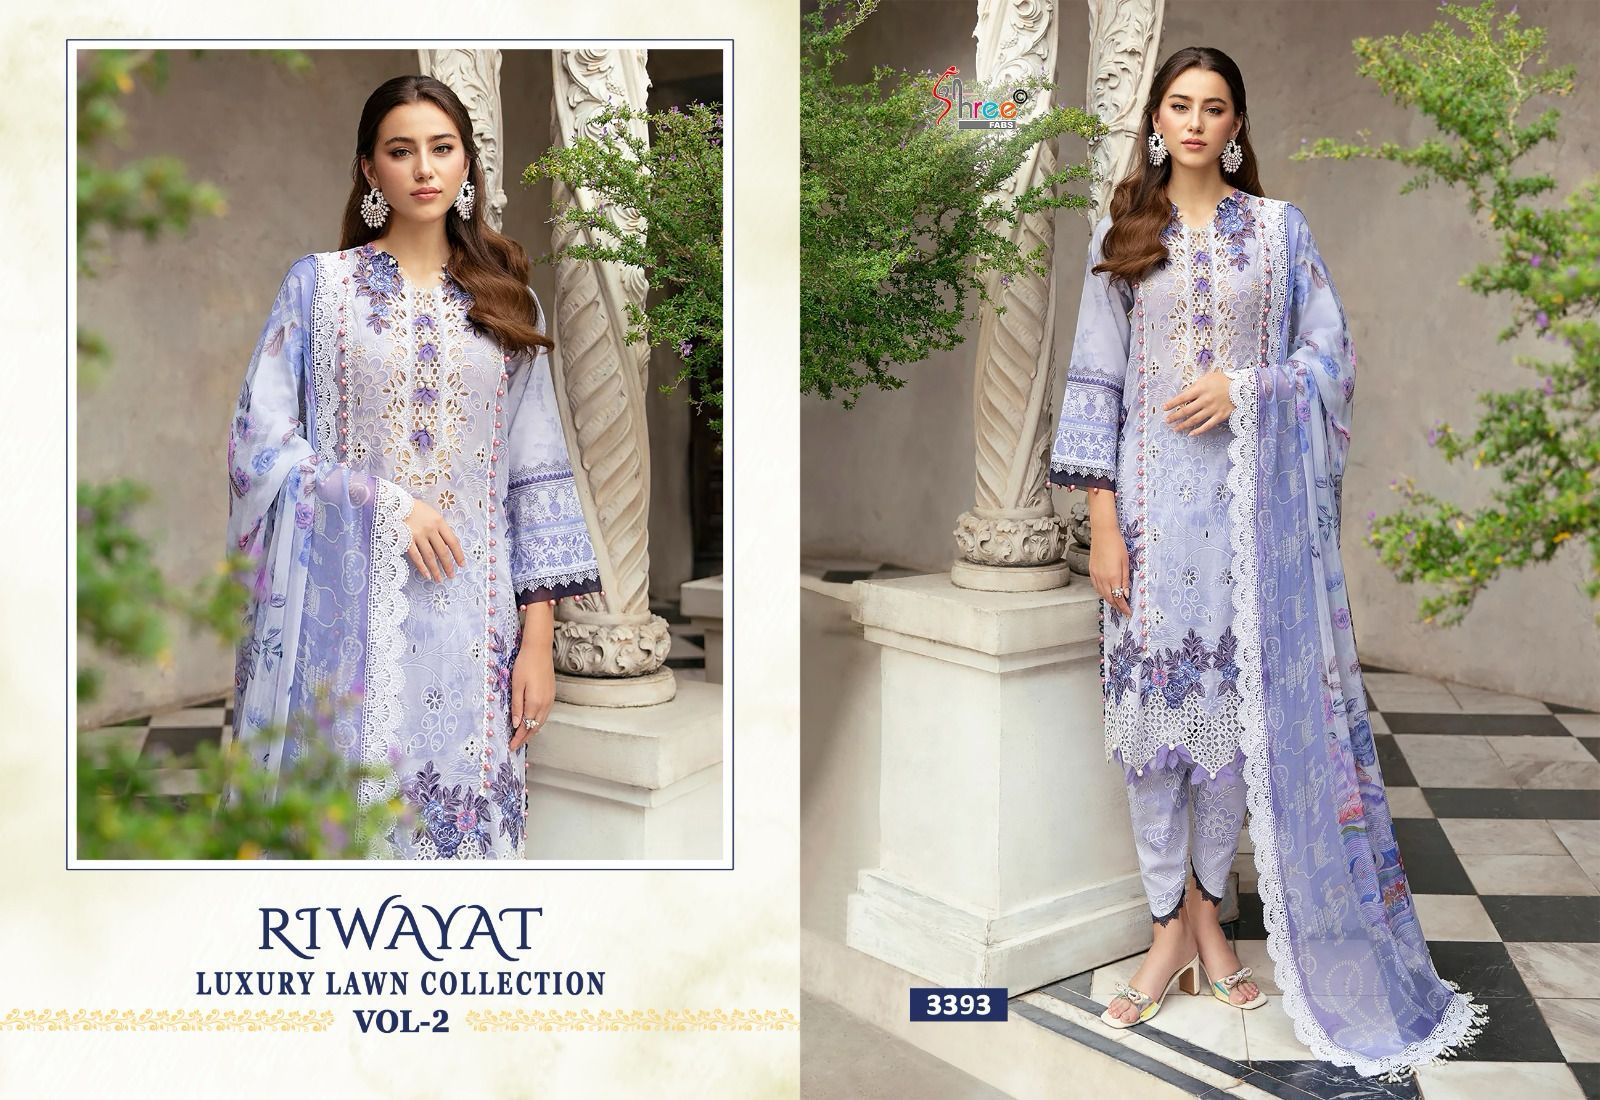 Shree Riwayat Luxury Lawn Collection Vol 2 collection 6